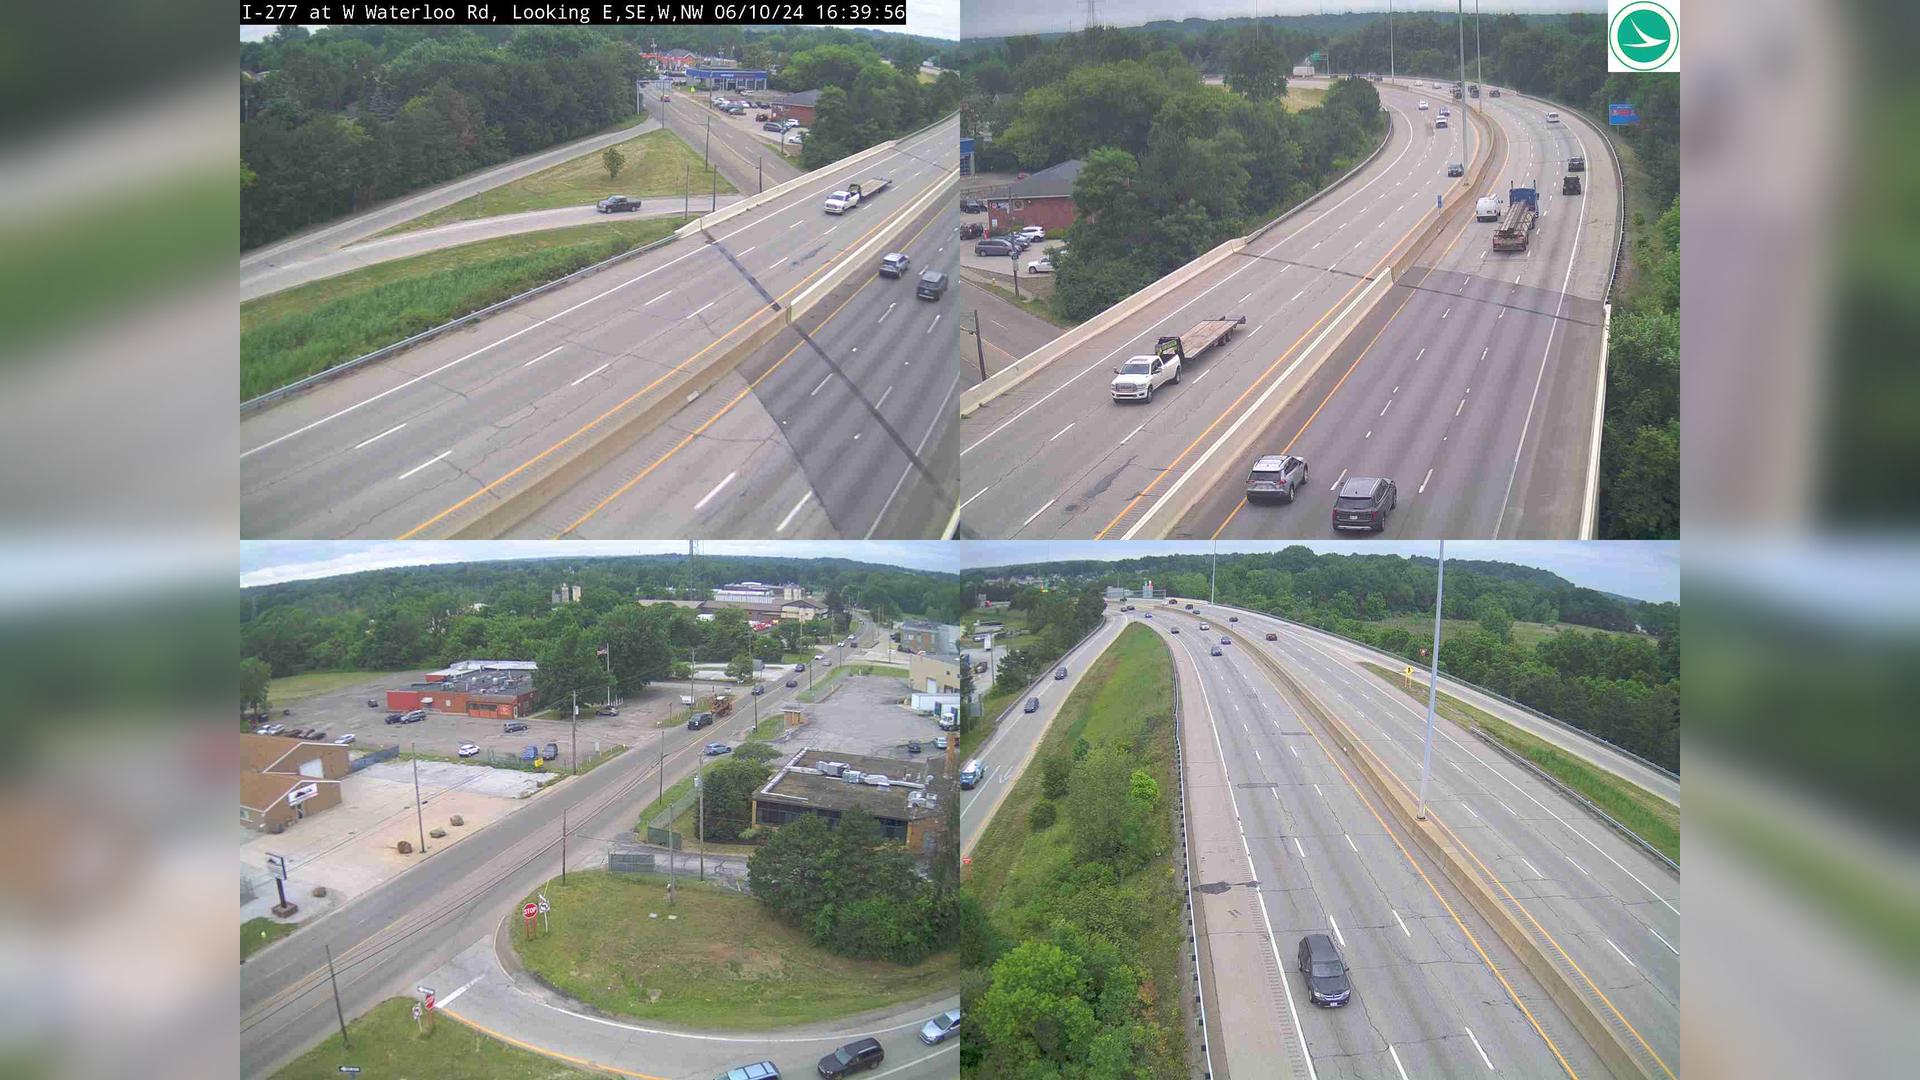 Traffic Cam Akron: I-277 at W Waterloo Rd